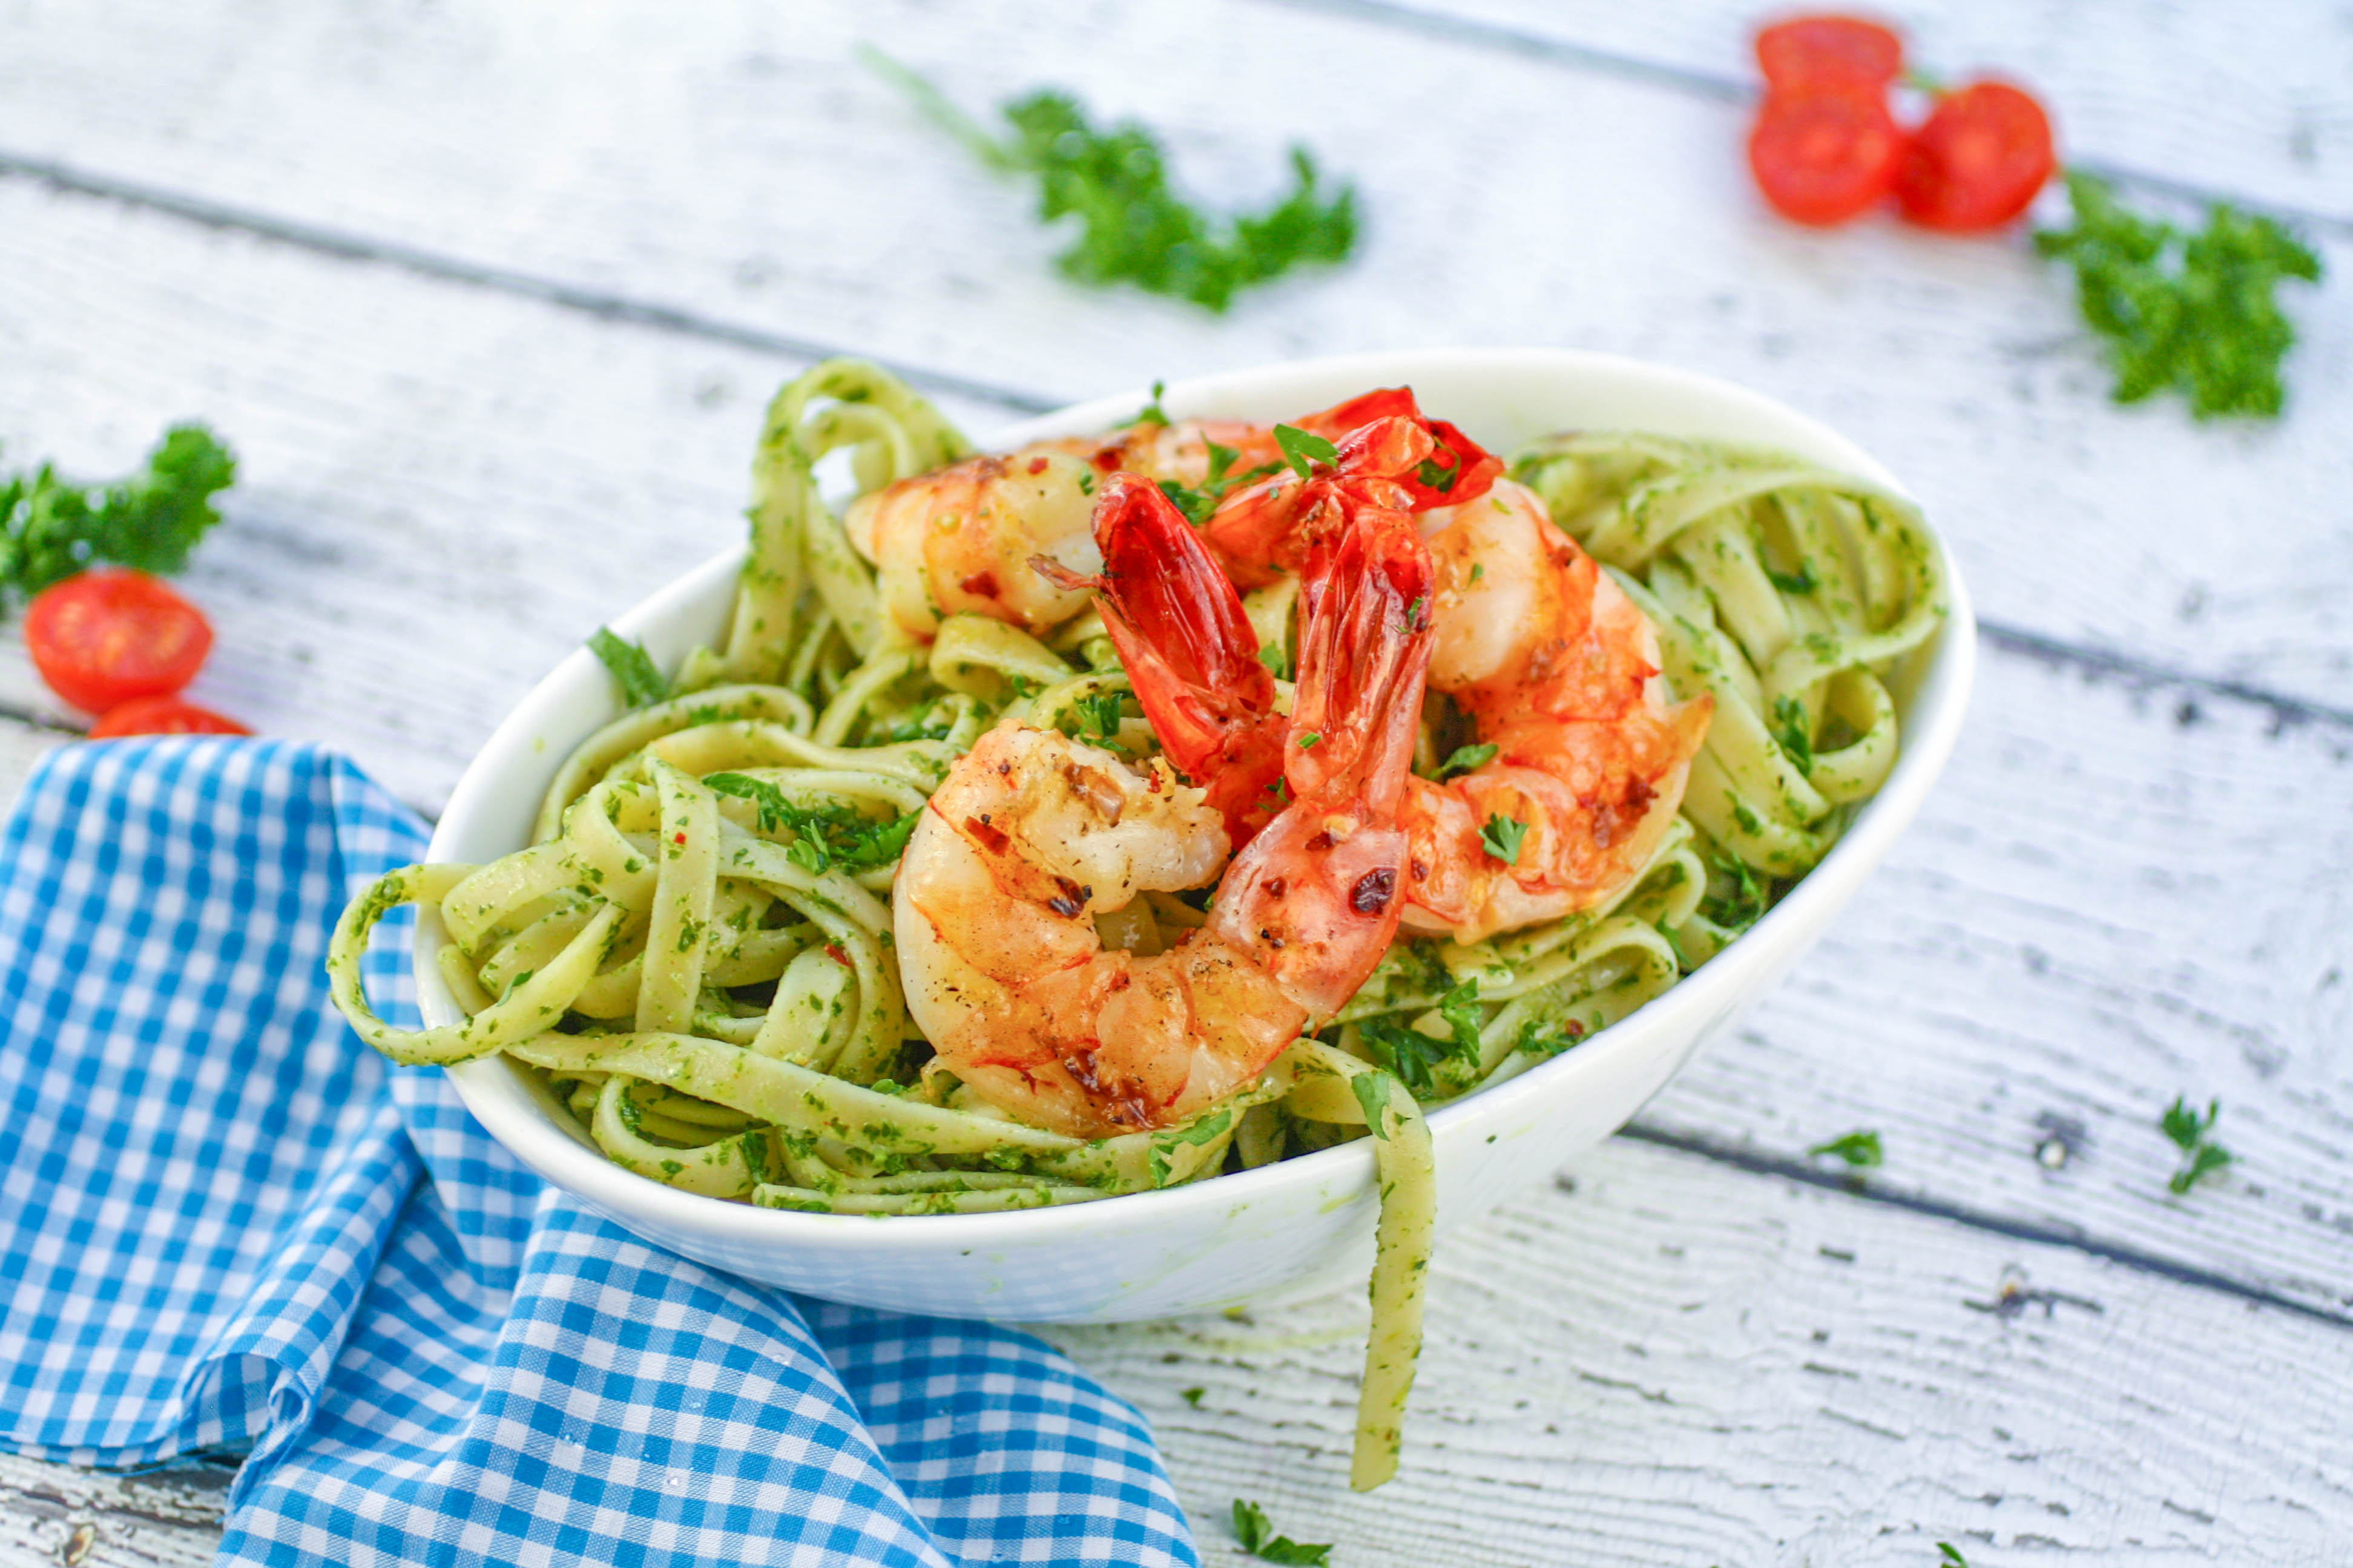 Chimichurri Pasta with Grilled Spicy Shrimp is perfect any night of the week. Chimichurri Pasta with Grilled Spicy Shrimp is an ideal meal during Lent.